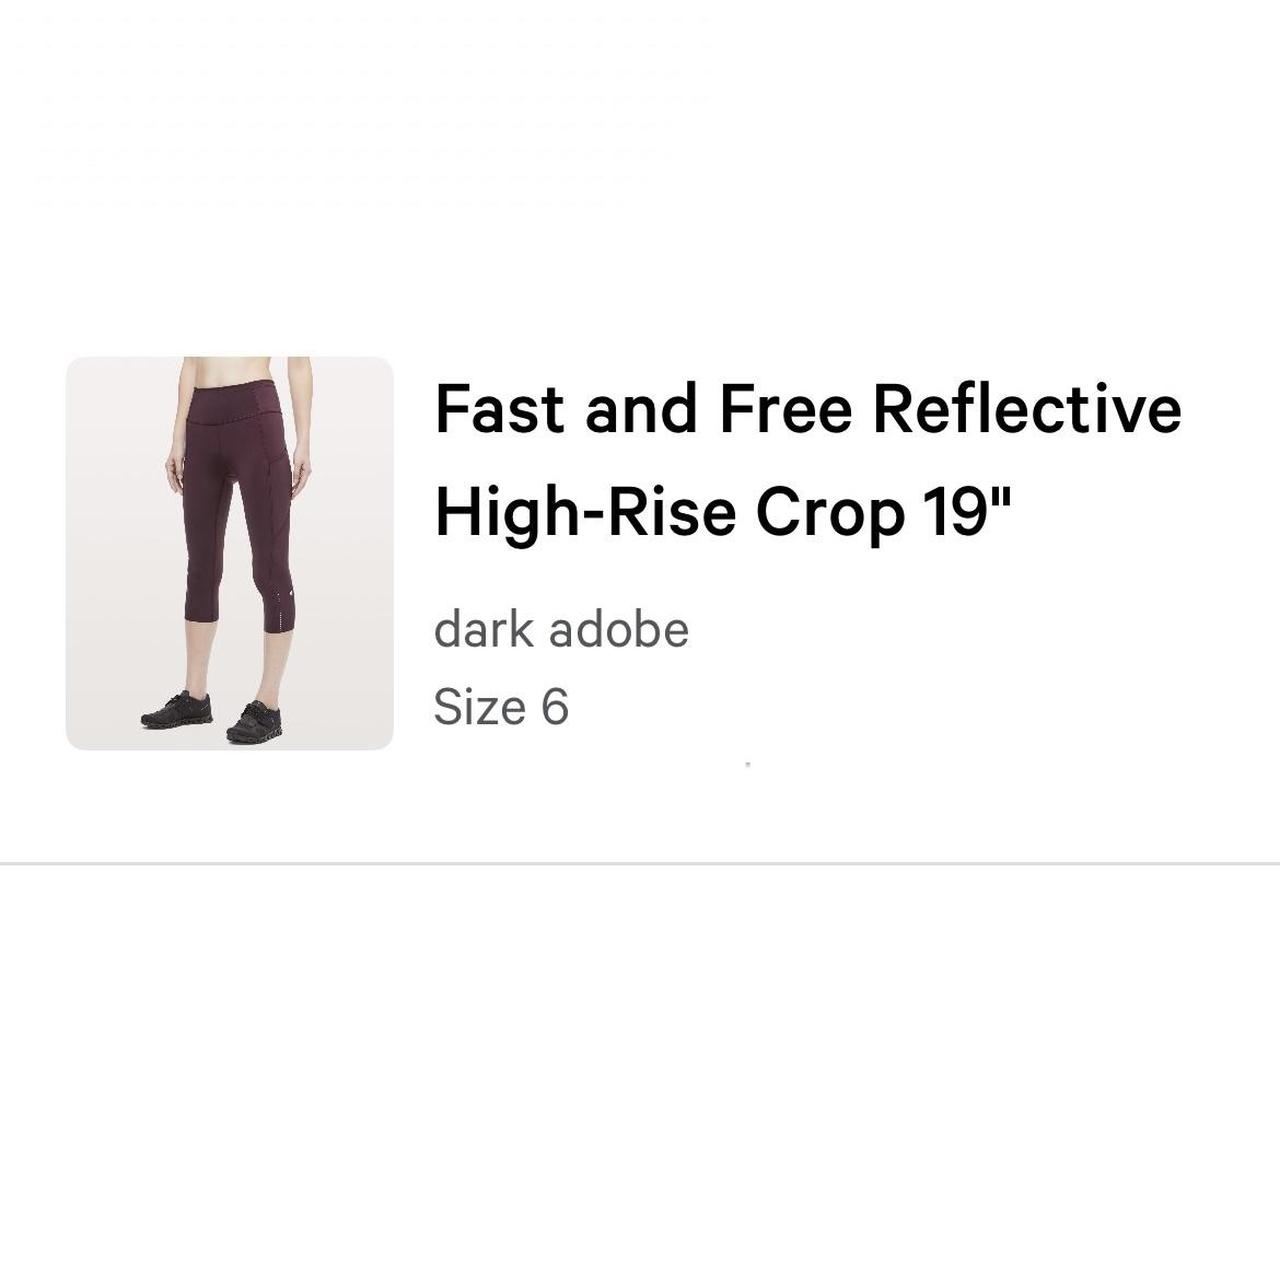 Fast and Free Reflective High-Rise Crop 19